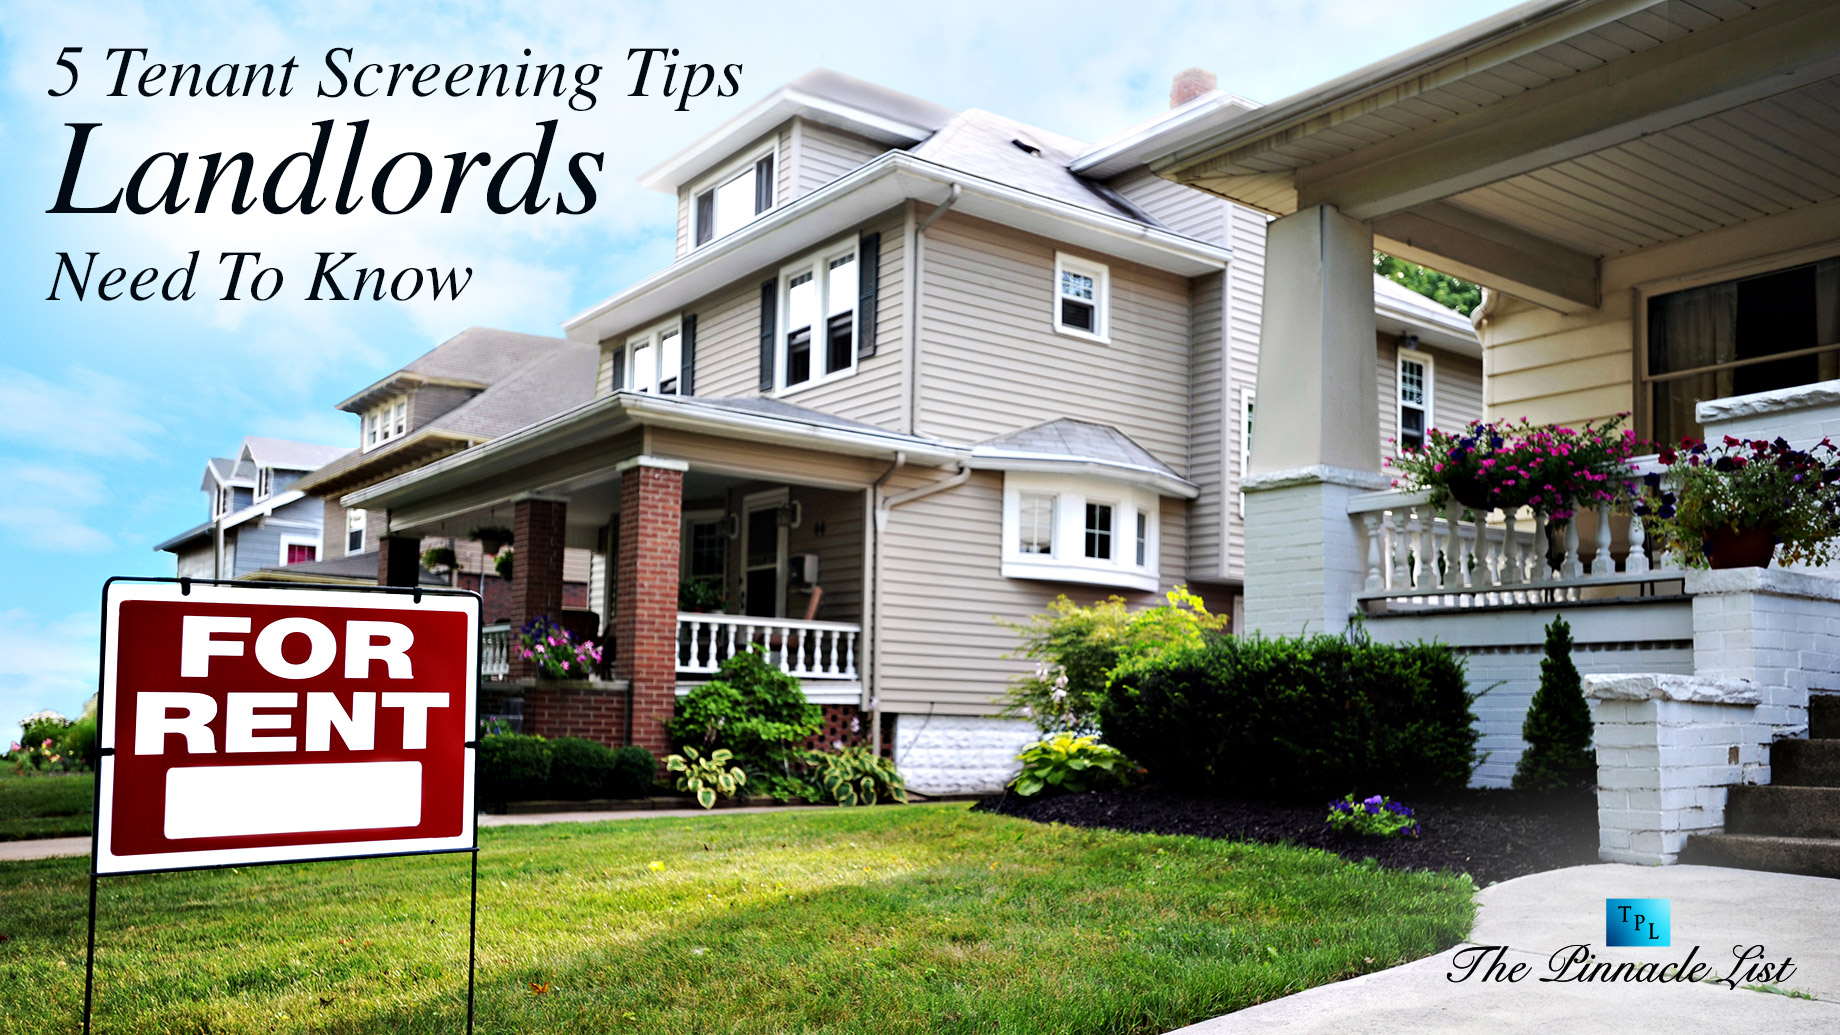 5 Tenant Screening Tips Landlords Need To Know